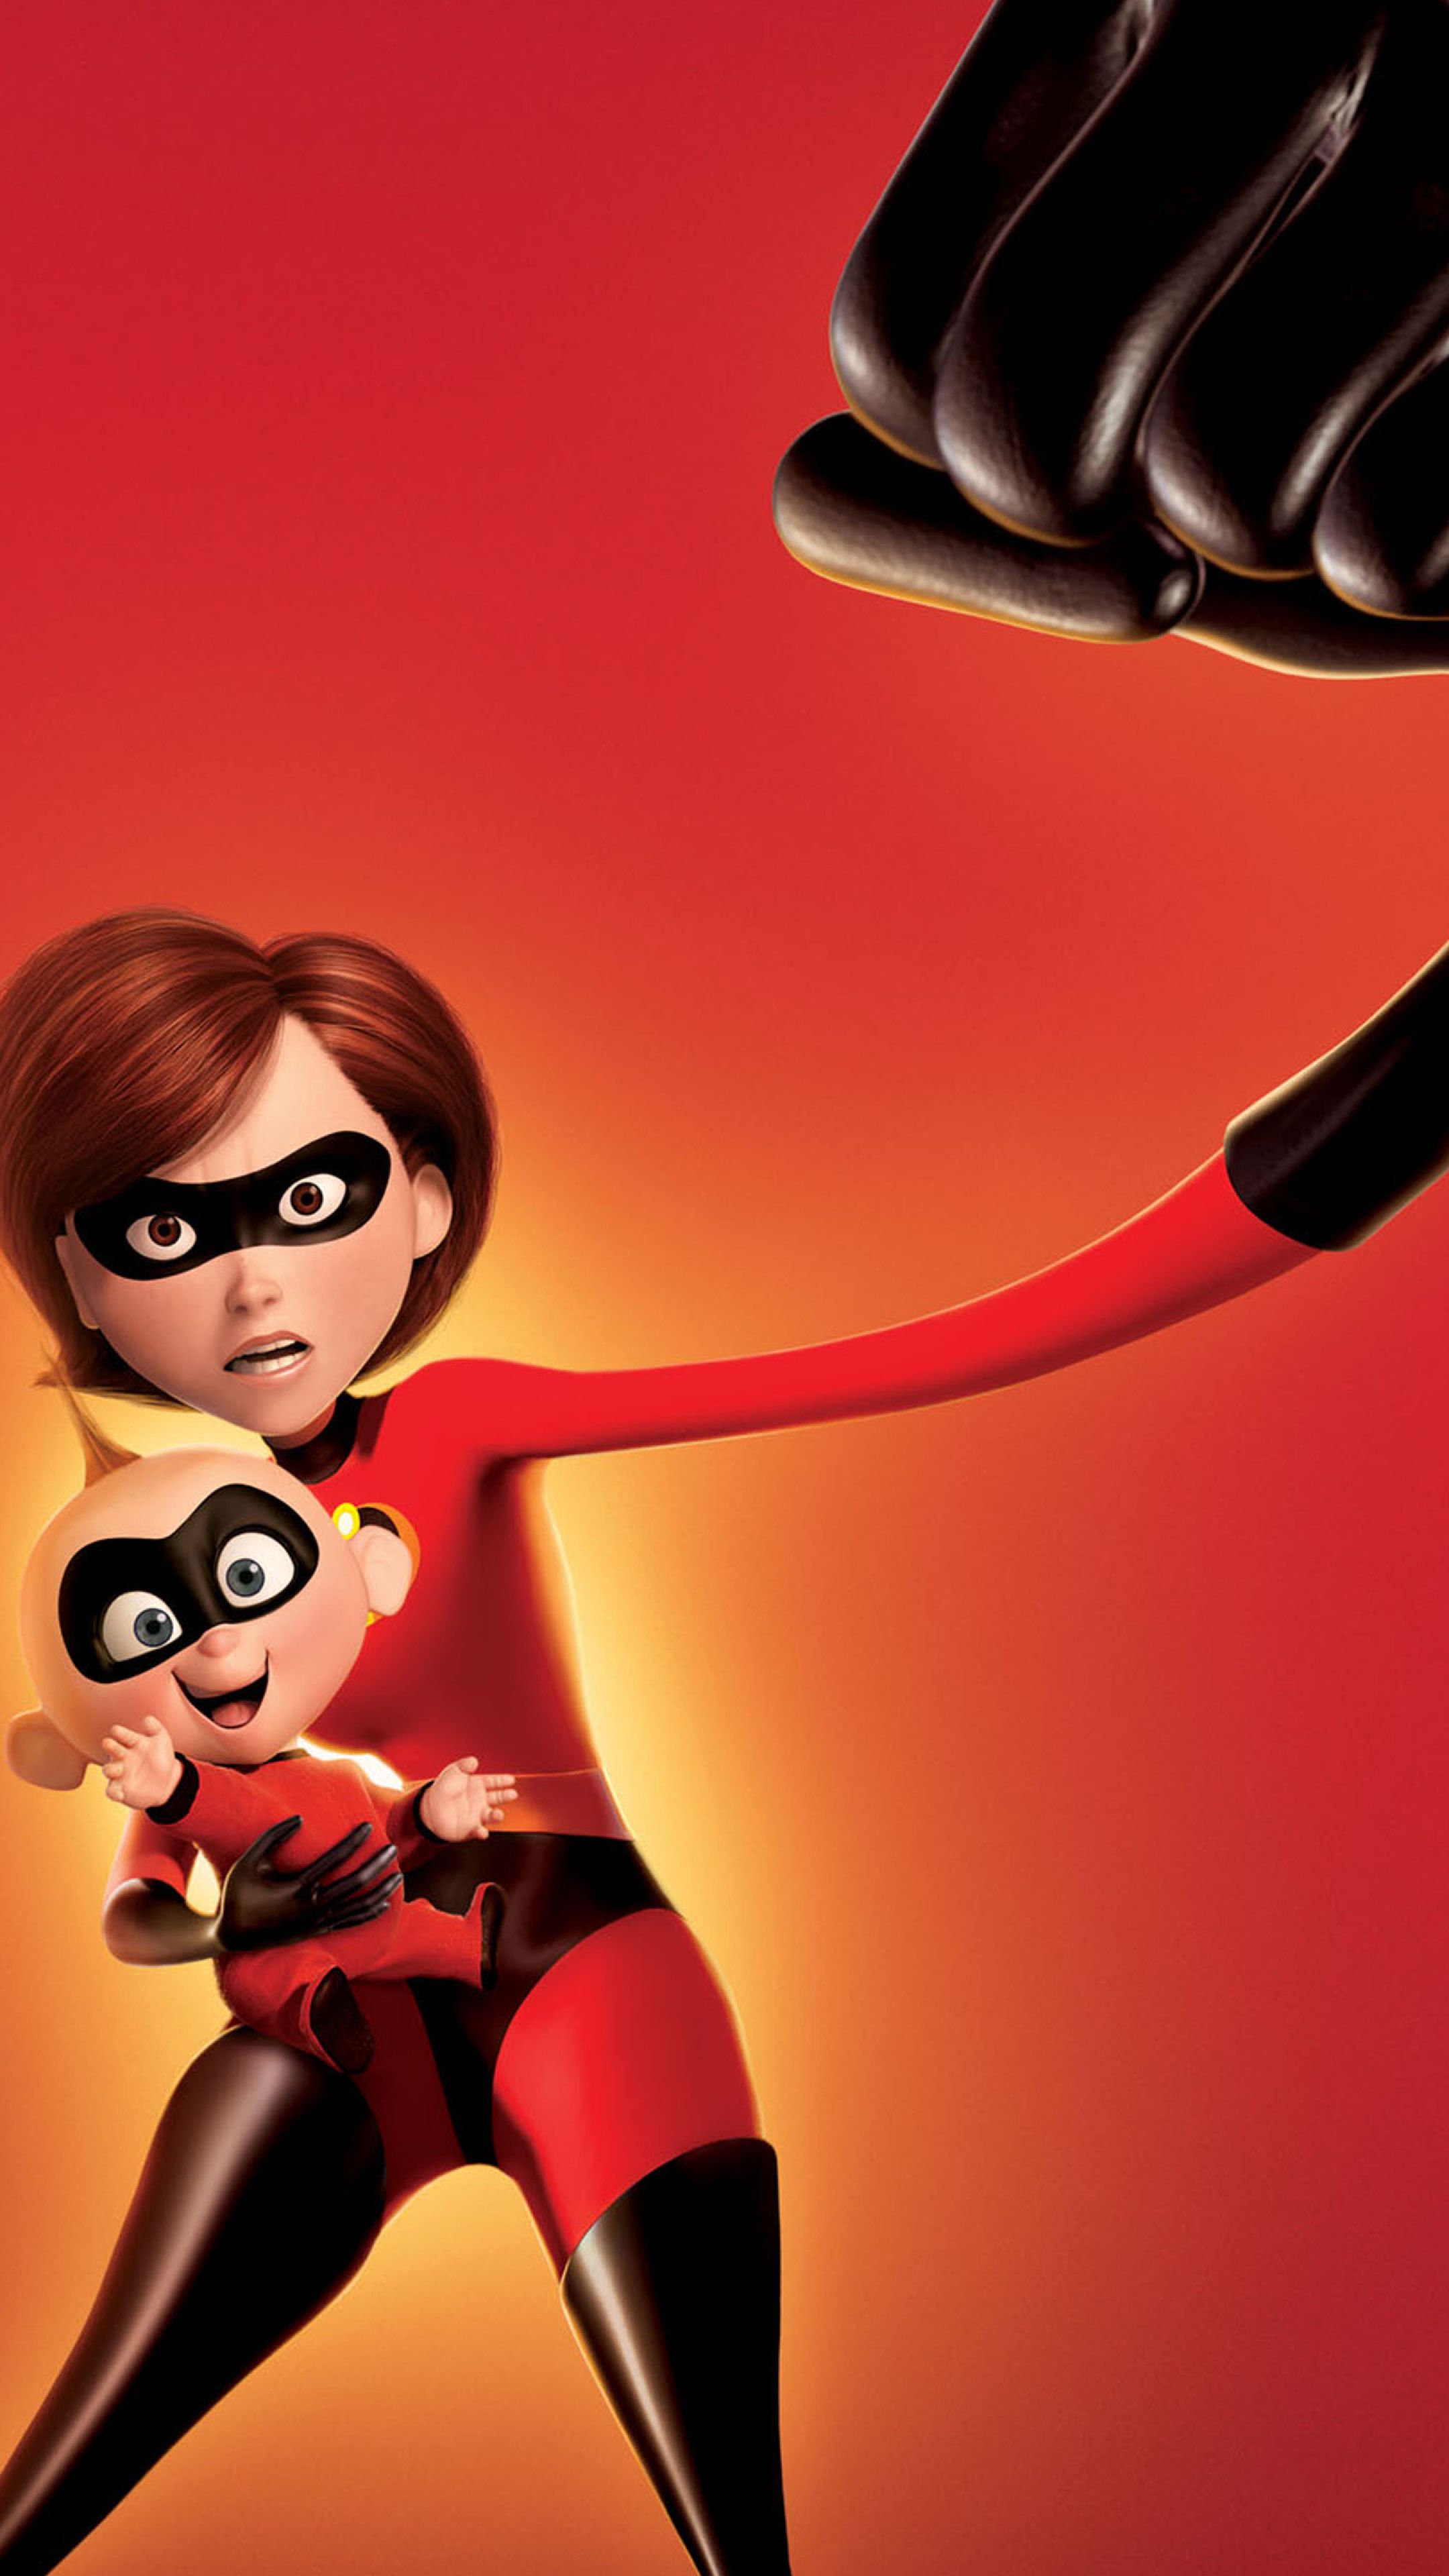 2160x3840 Jack Jack Parr And Elastigirl The Incredibles 2 Sony Xperia X Xz Z5 Premium Wallpaper Hd Movies 4k Wallpaper Image Photo And Background